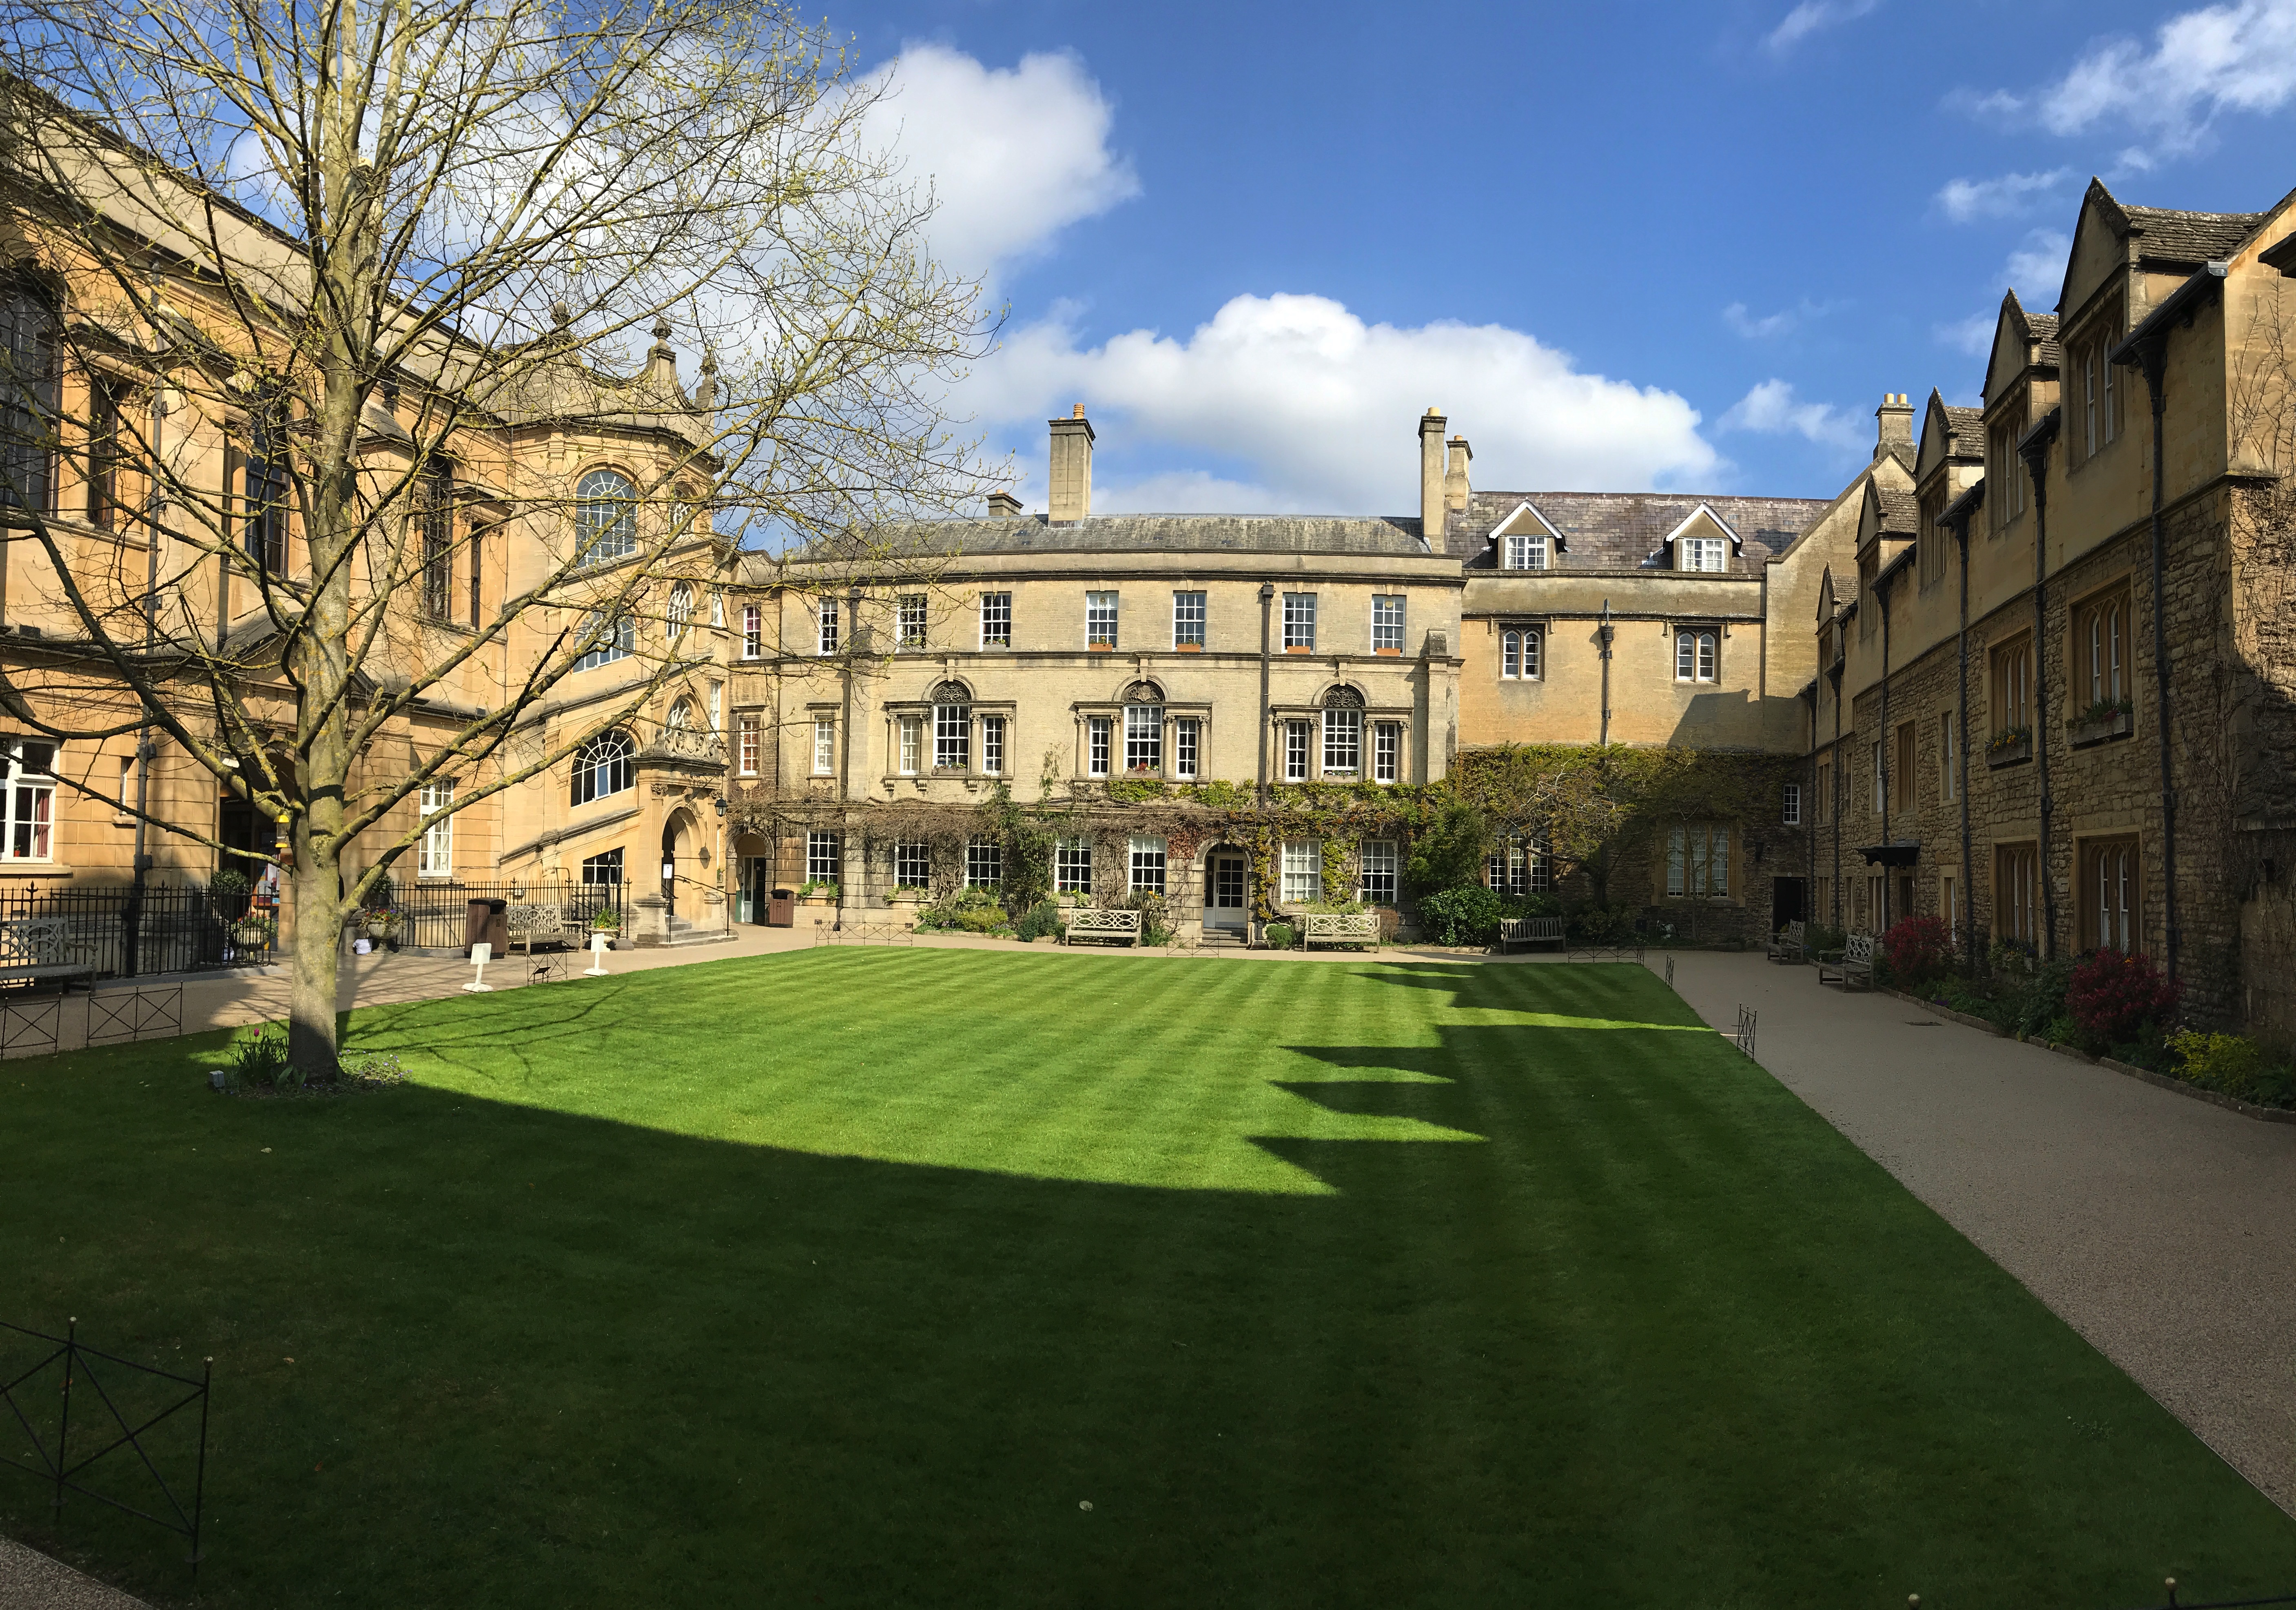 The Courtyard of Hertford College